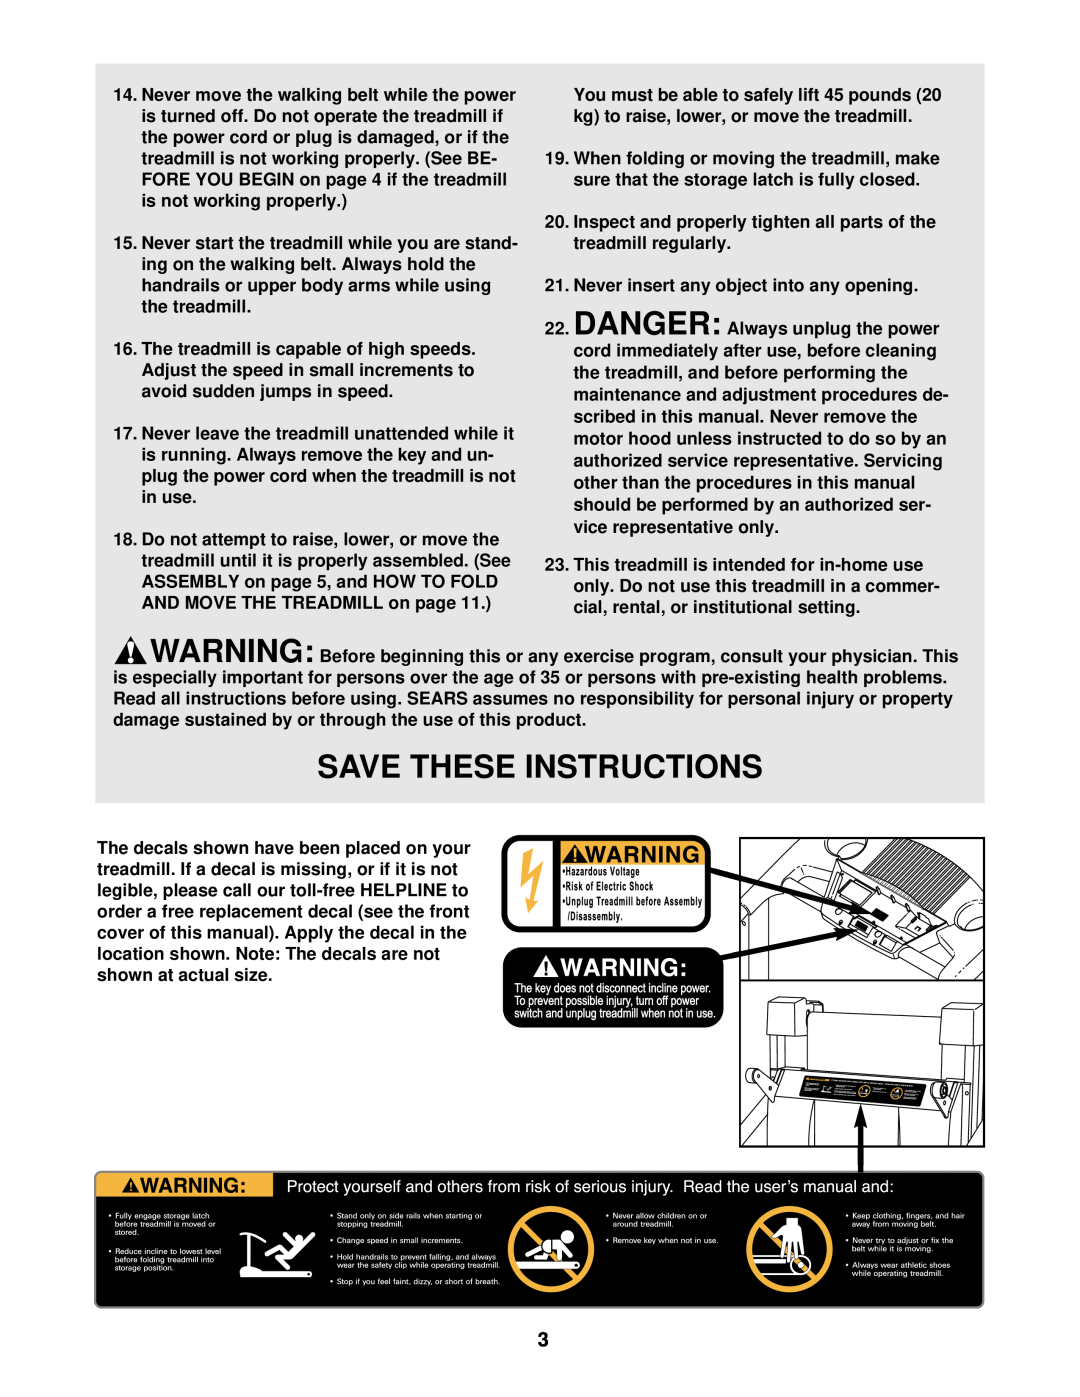 ProForm 831.293230 user manual Save These Instructions, Never leave the treadmill unattended while it, in use 